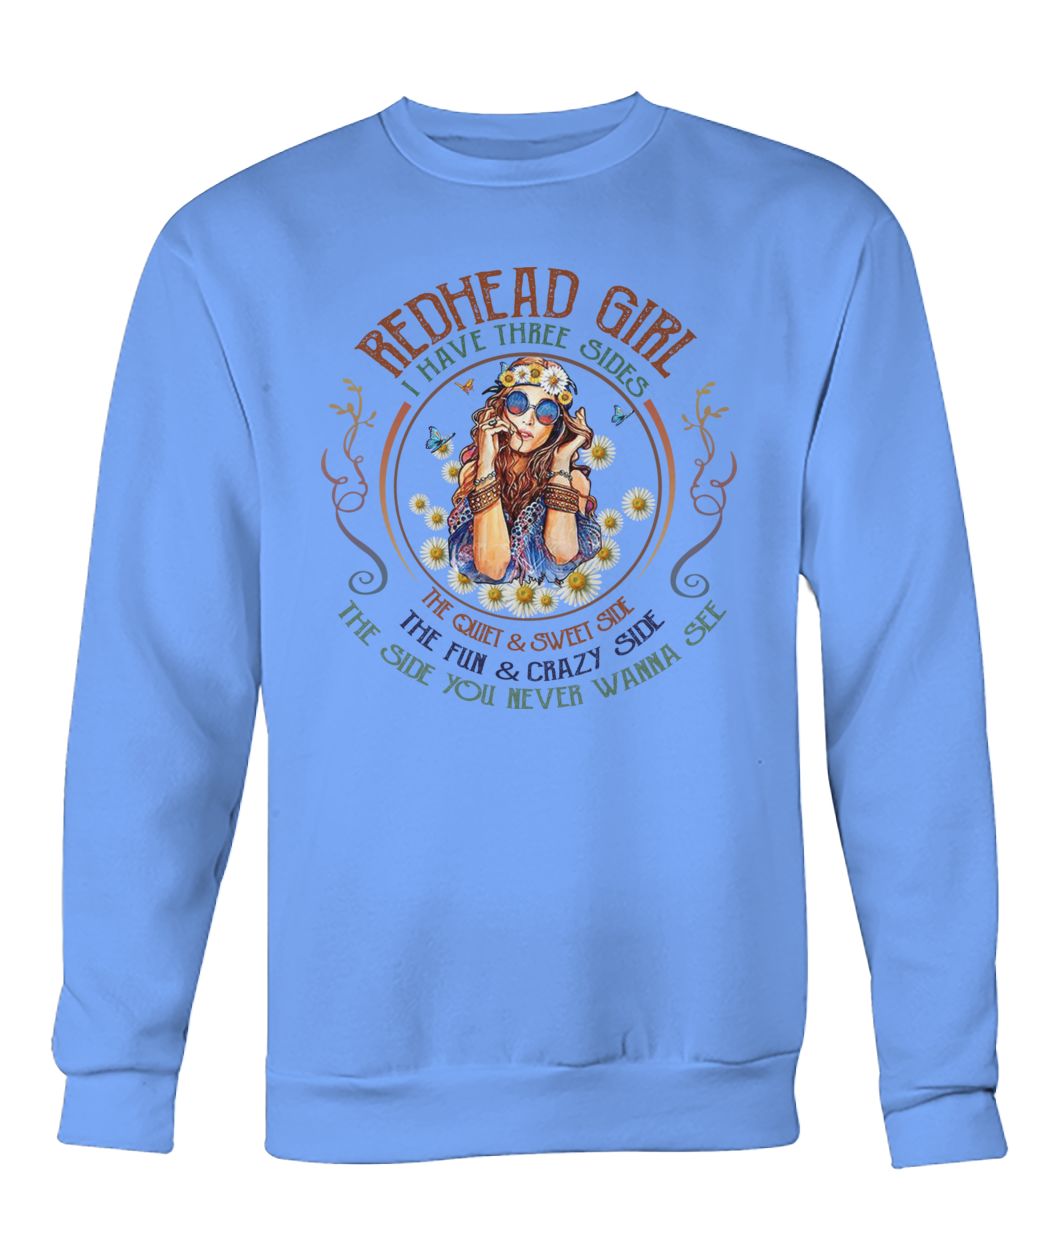 Redhead girl I have three sides the quiet and sweet side crew neck sweatshirt